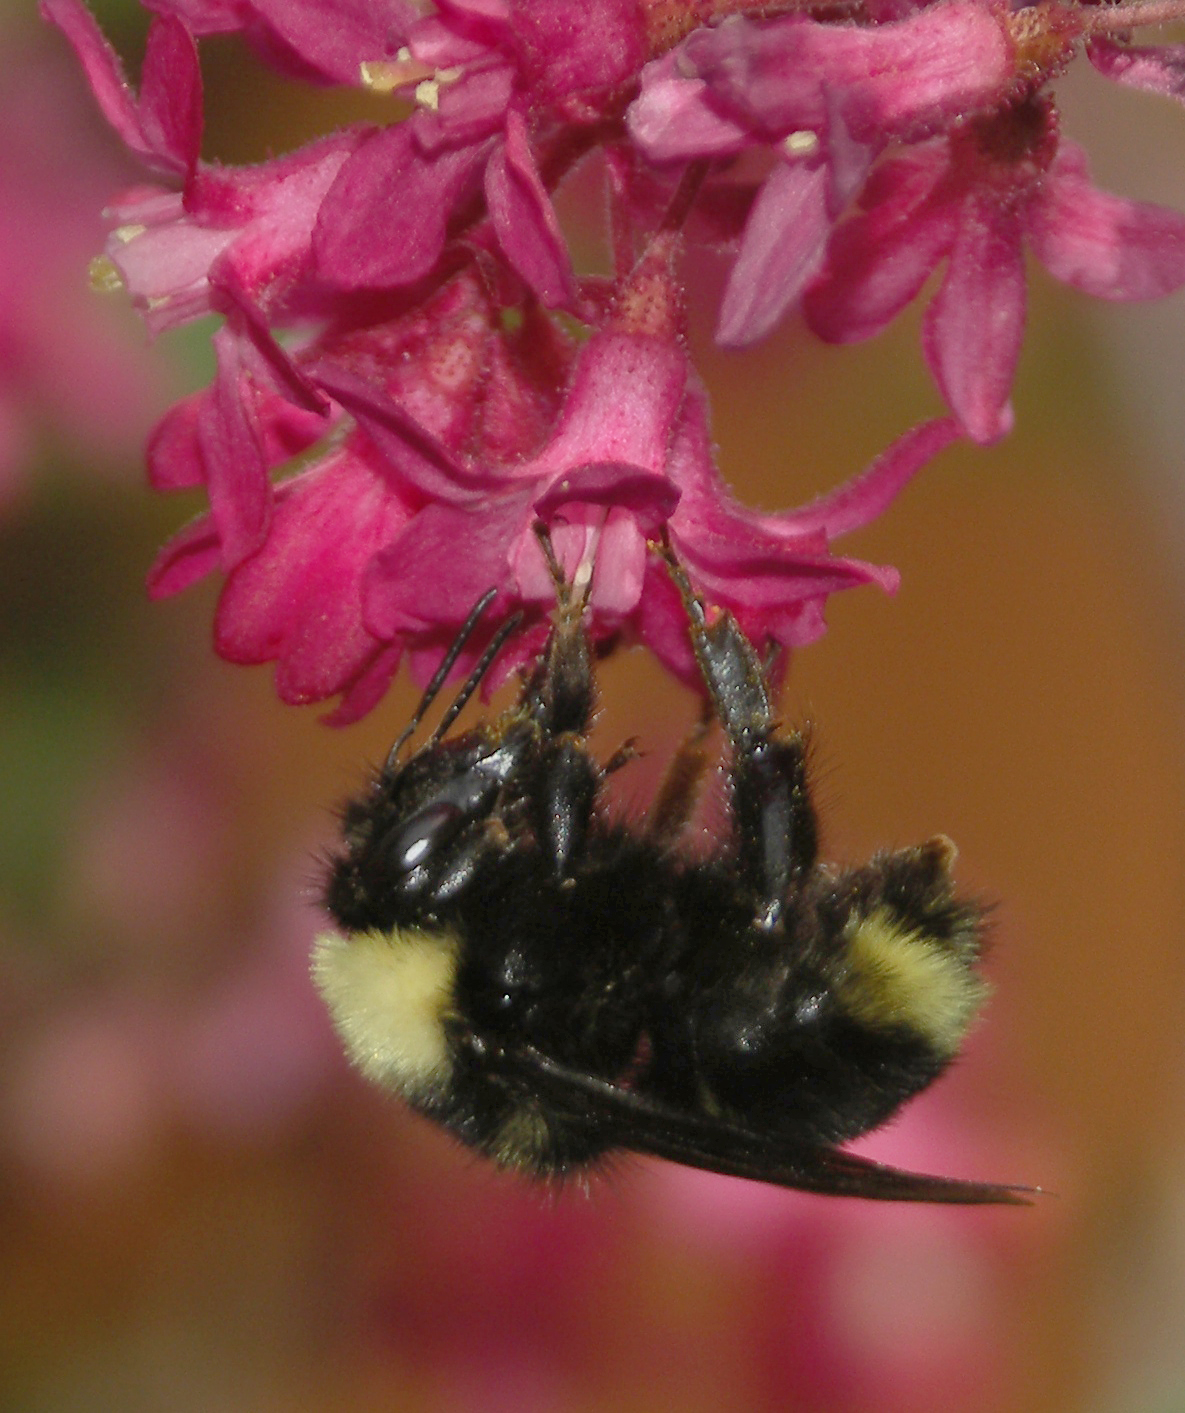 An up-close image of a fuzzy bumble bee drinking nectar from red current.